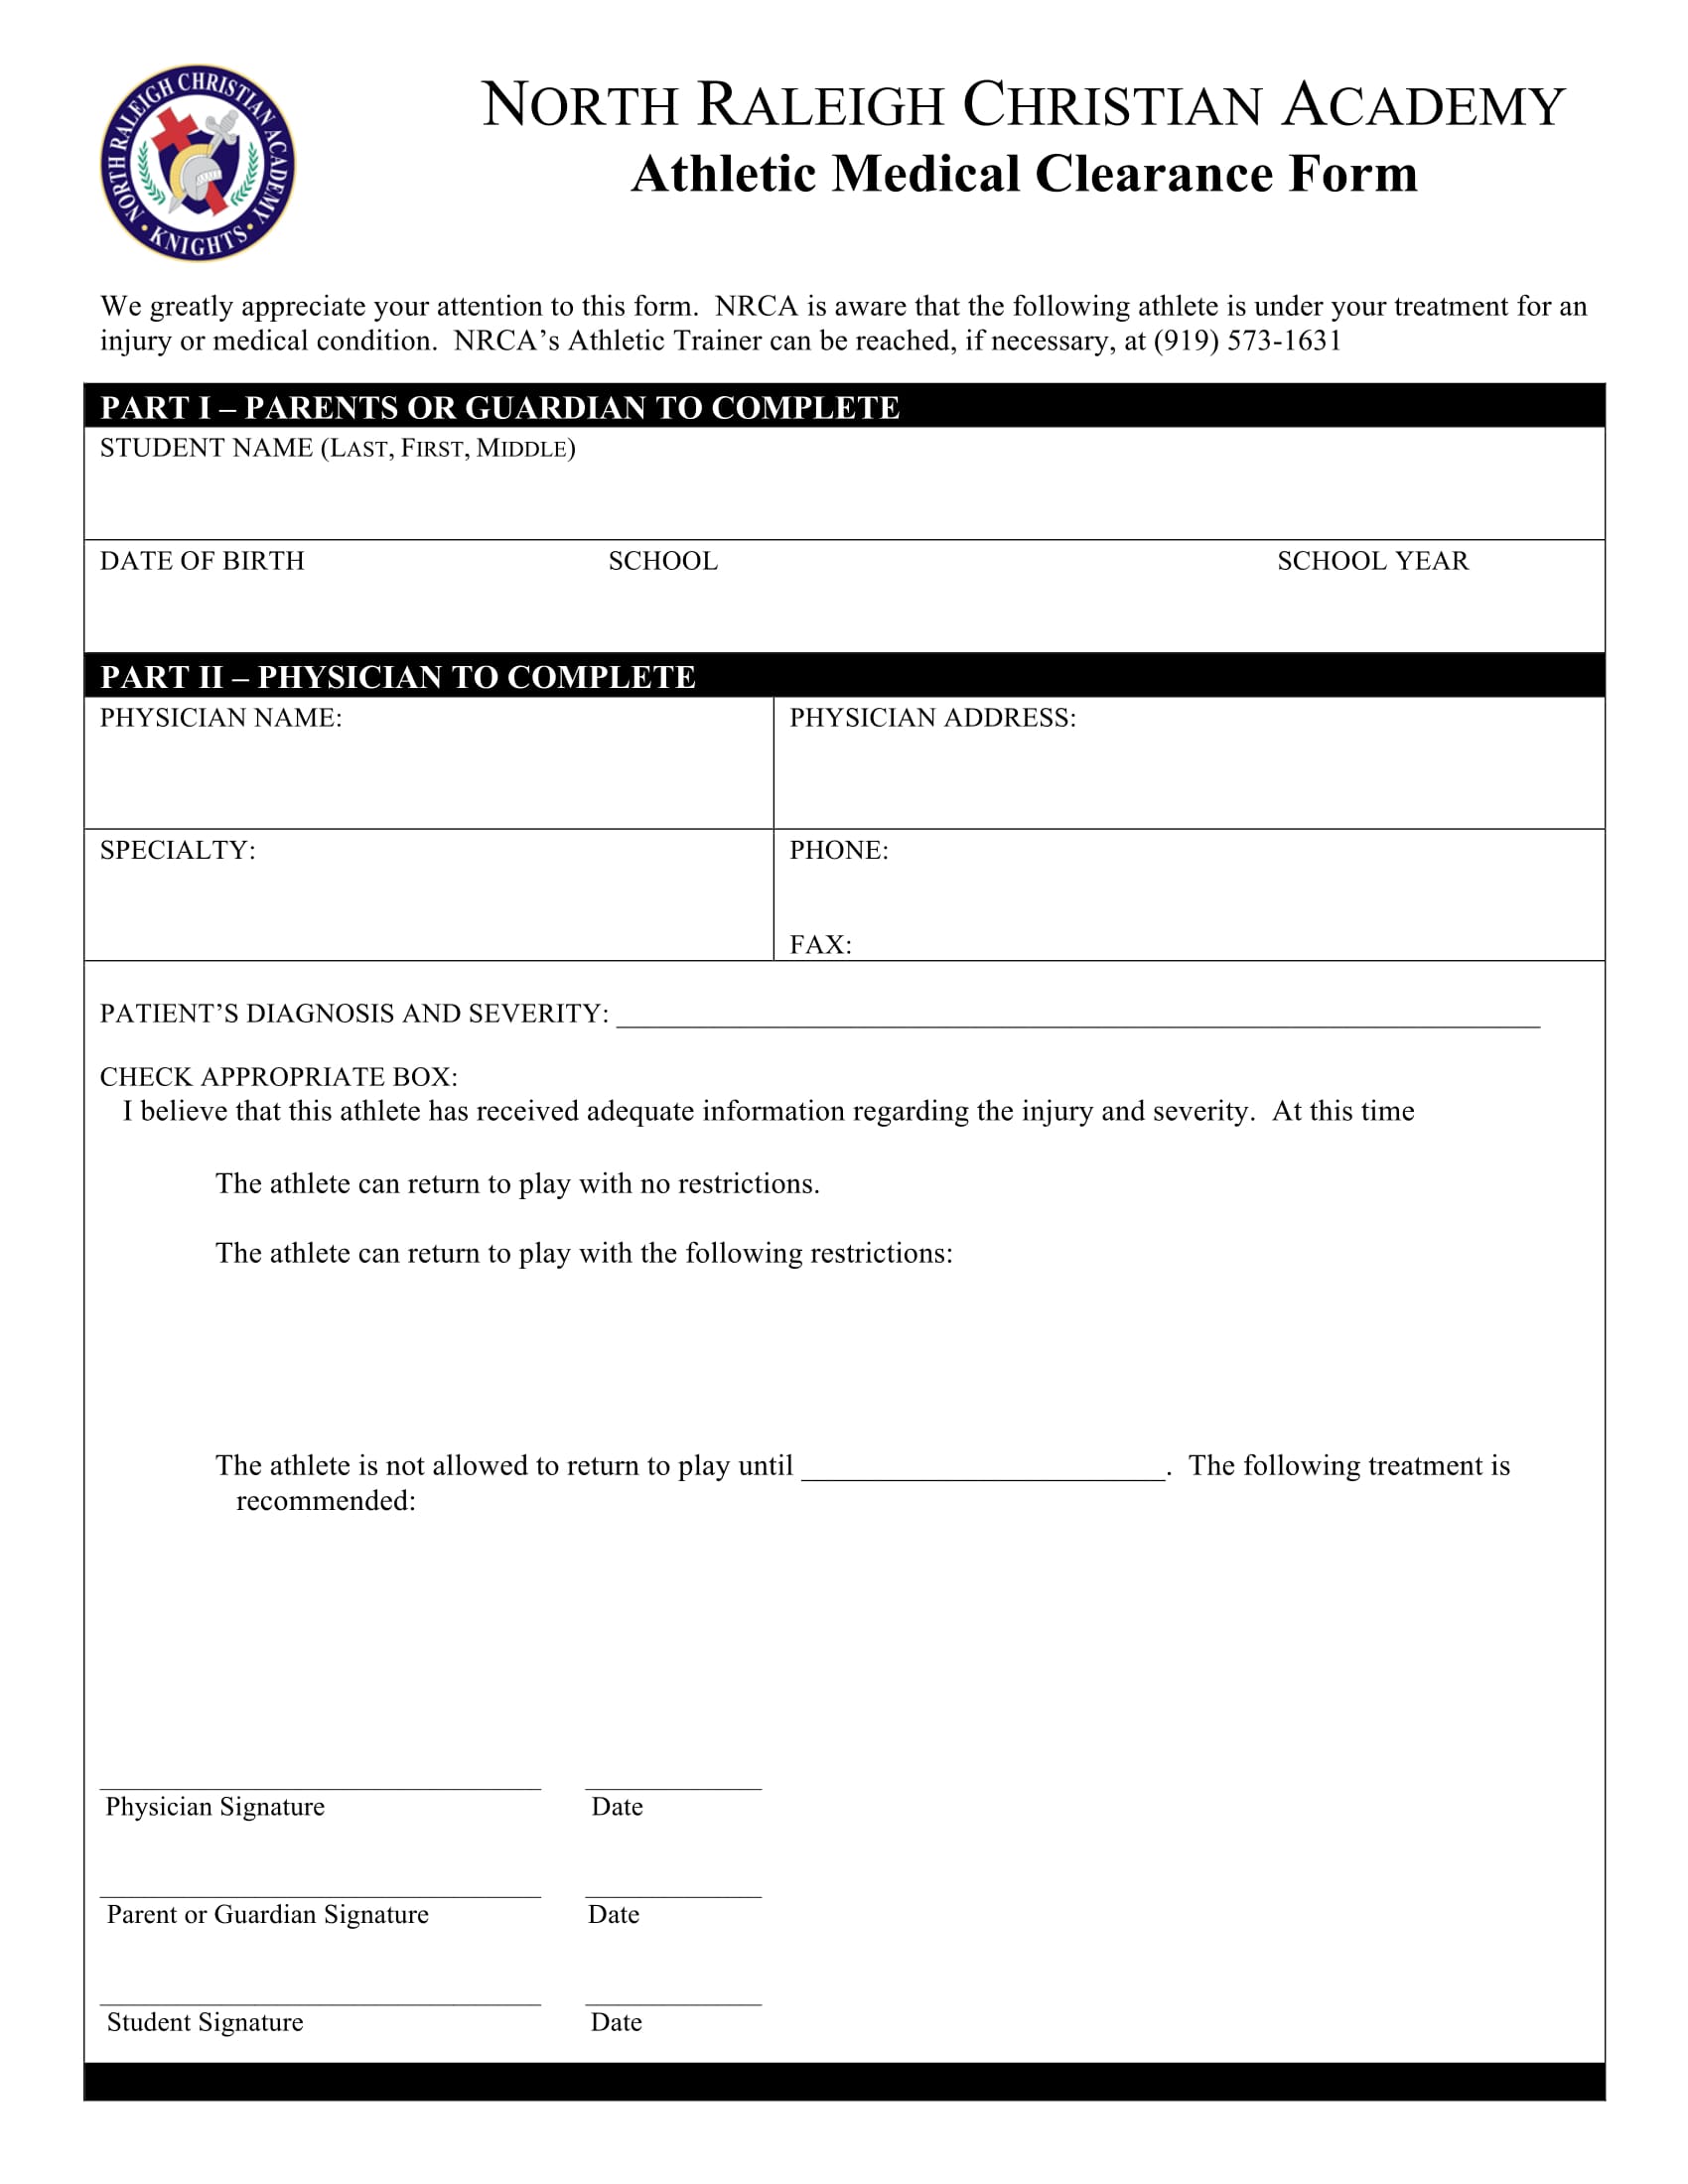 athletic medical clearance form 1